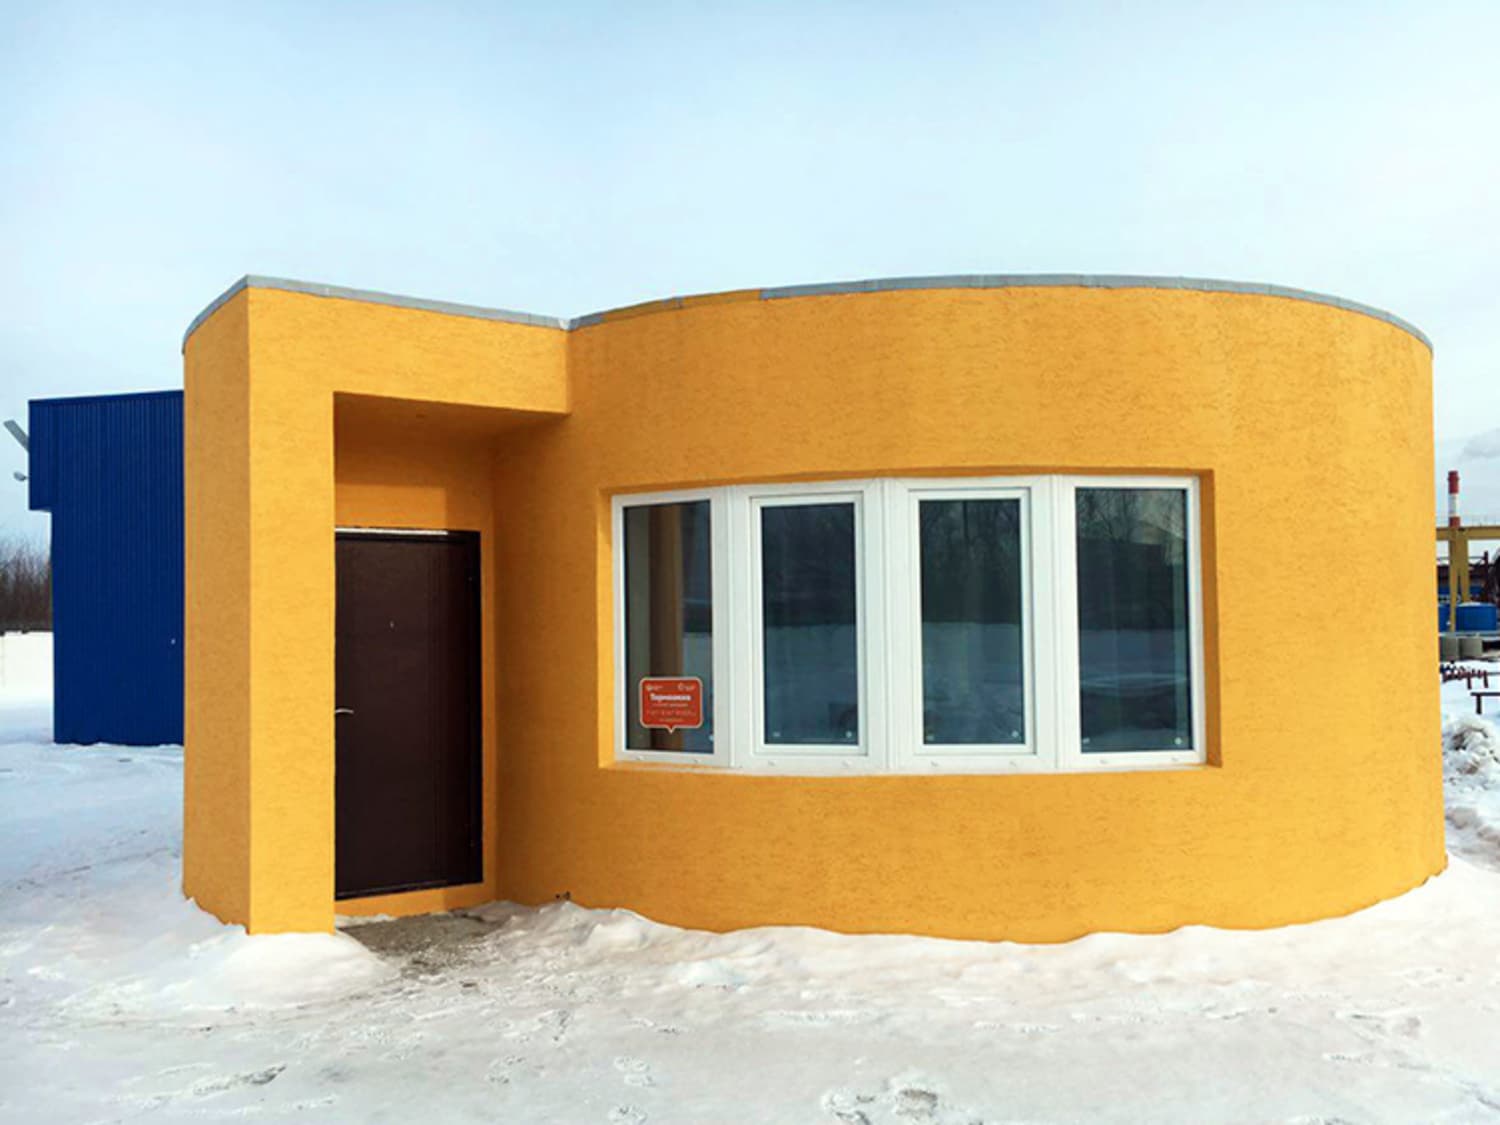 Icon's 3D Printer Can Build a Tiny Home in 24 Hours